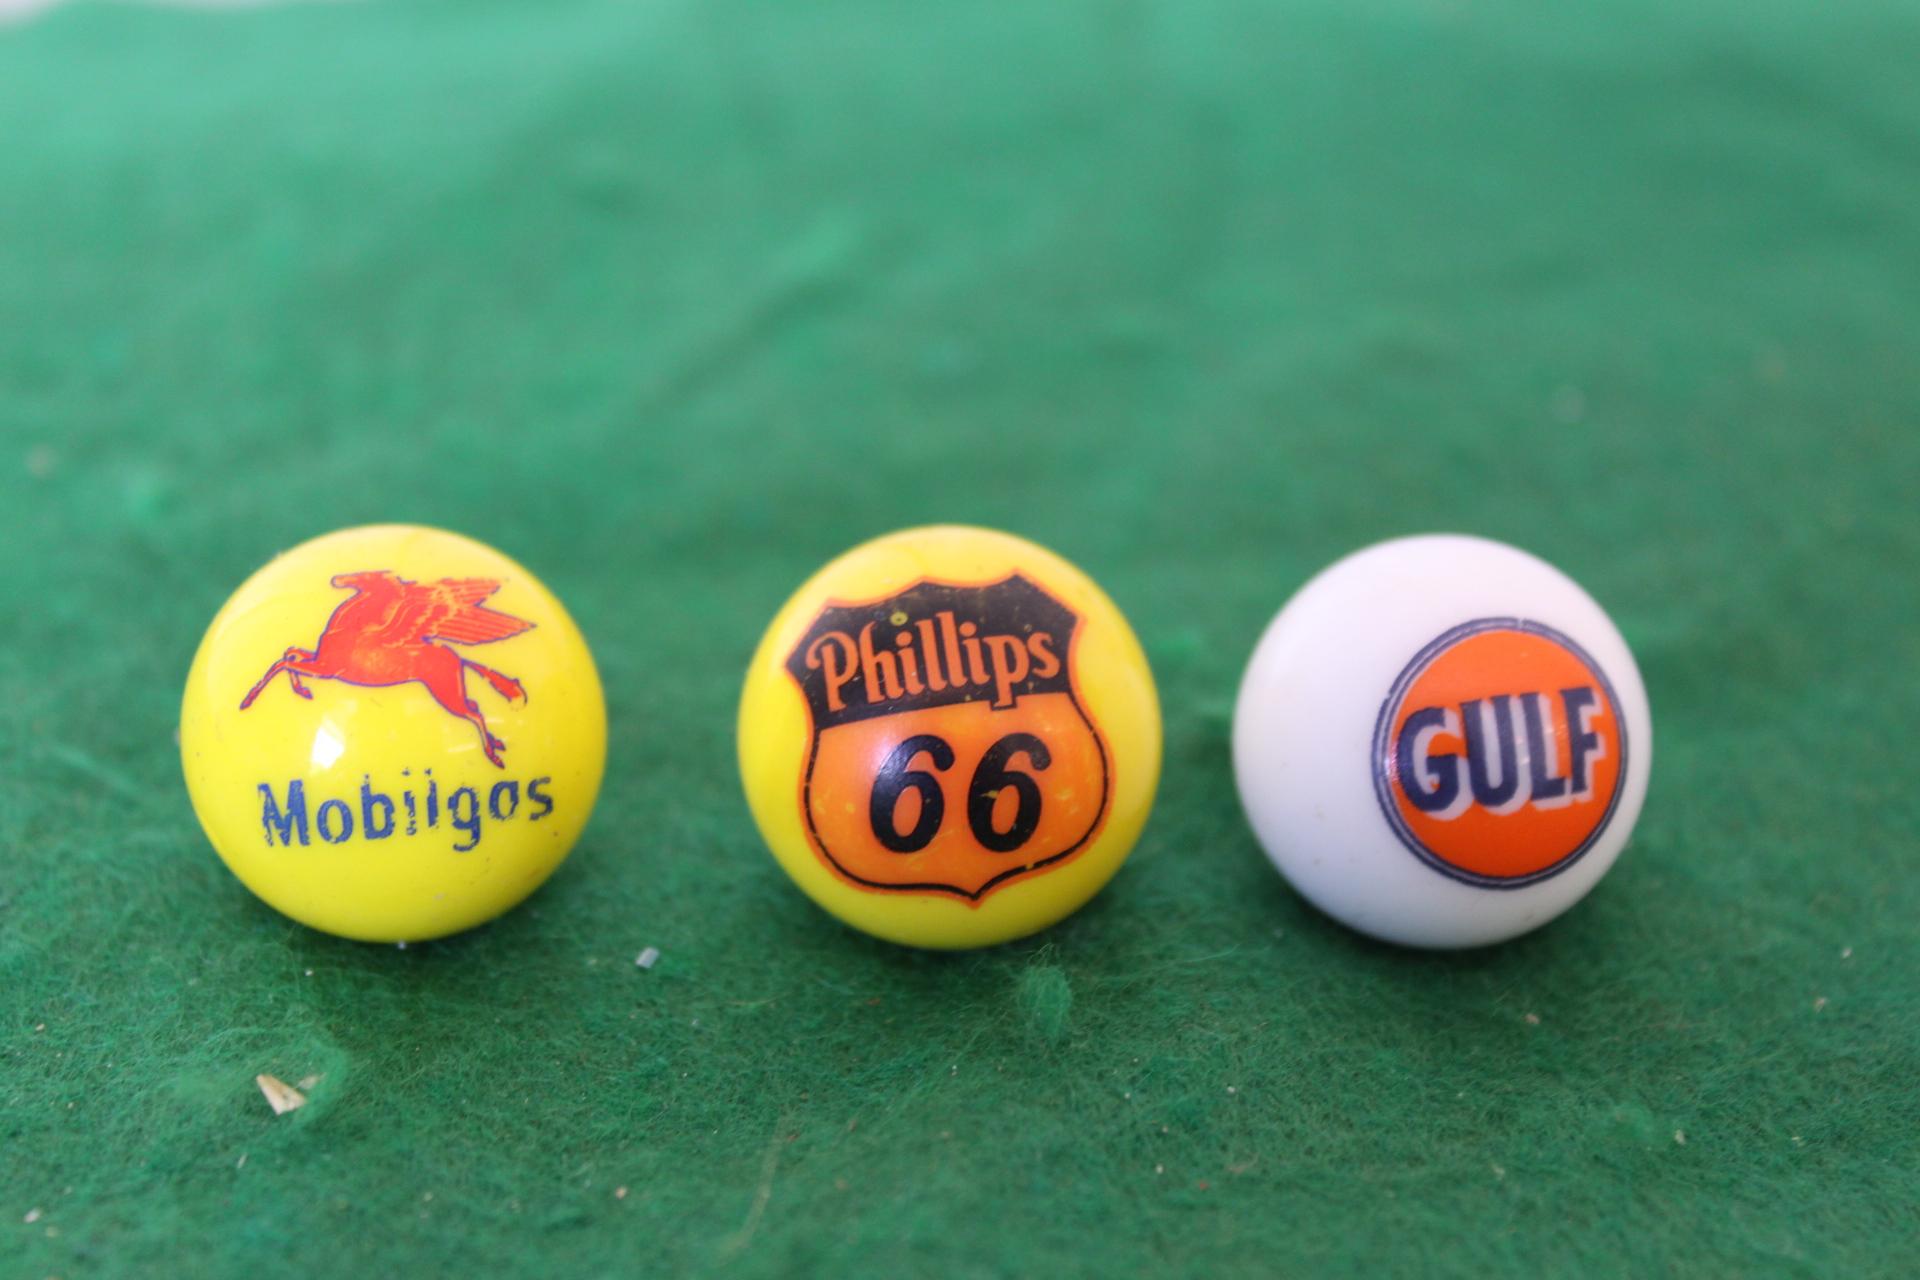 (3) Marbles, Mobil, Gulf, and Phillips 66